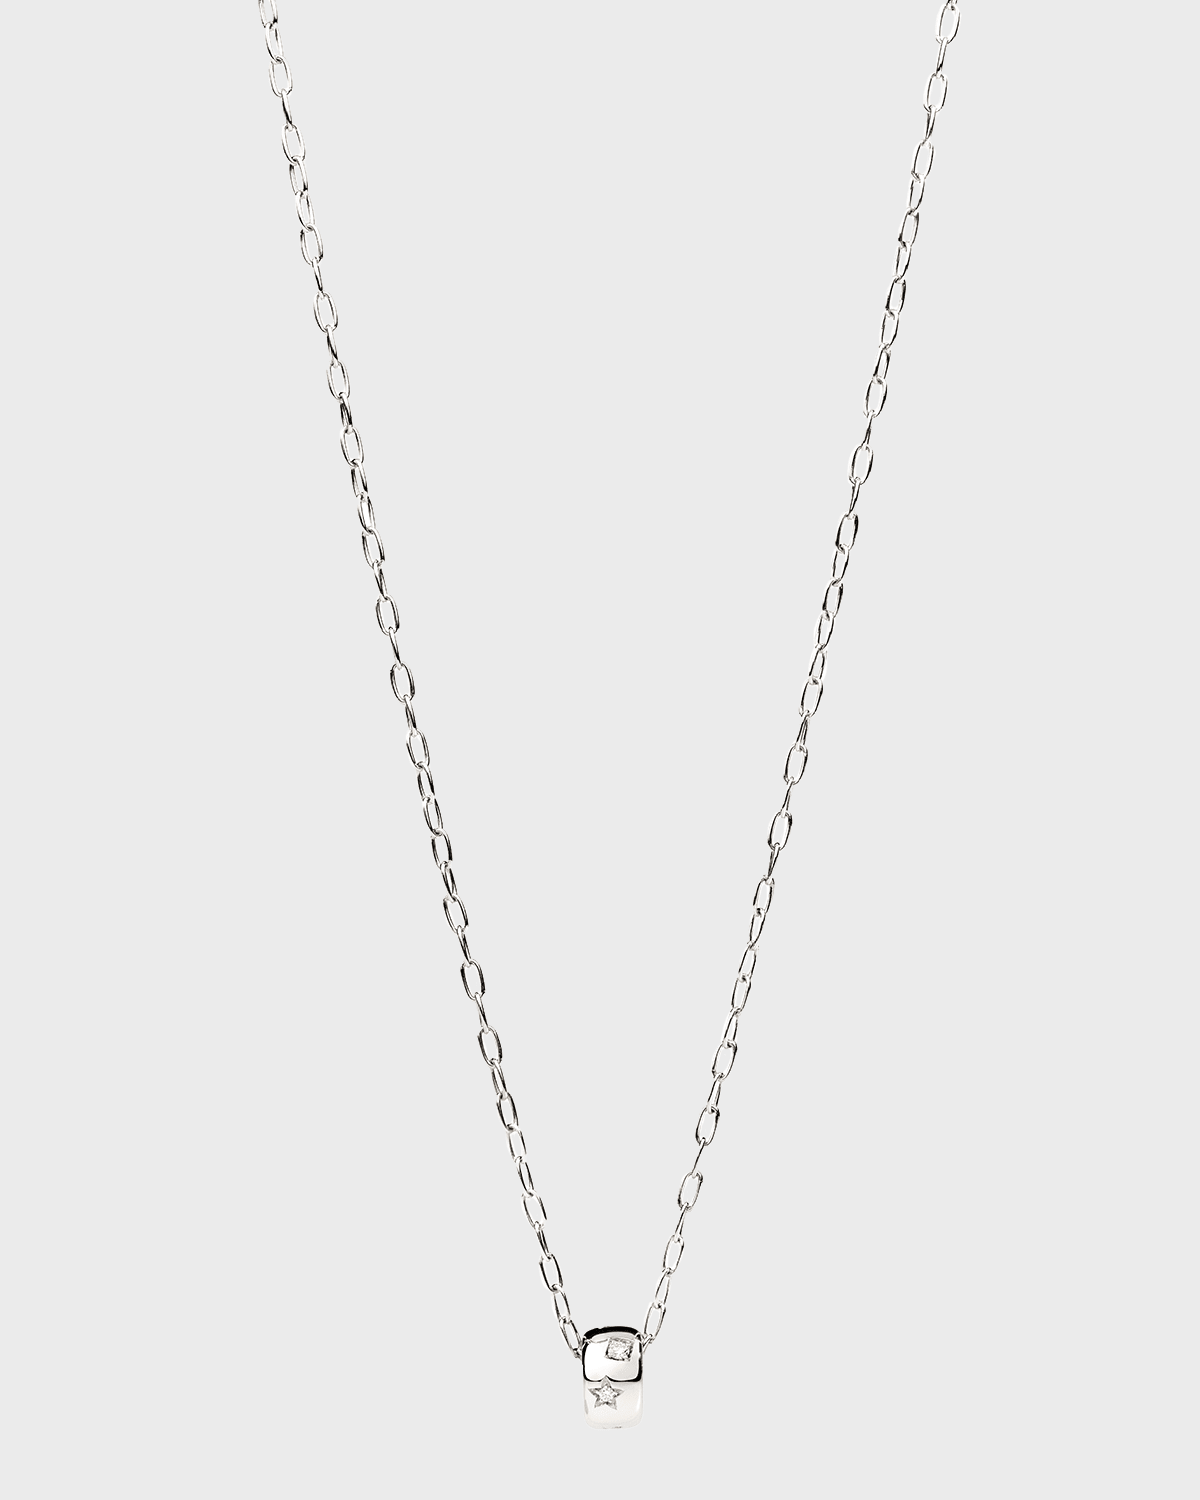 Iconic Pendant Necklace in White Gold and Diamonds